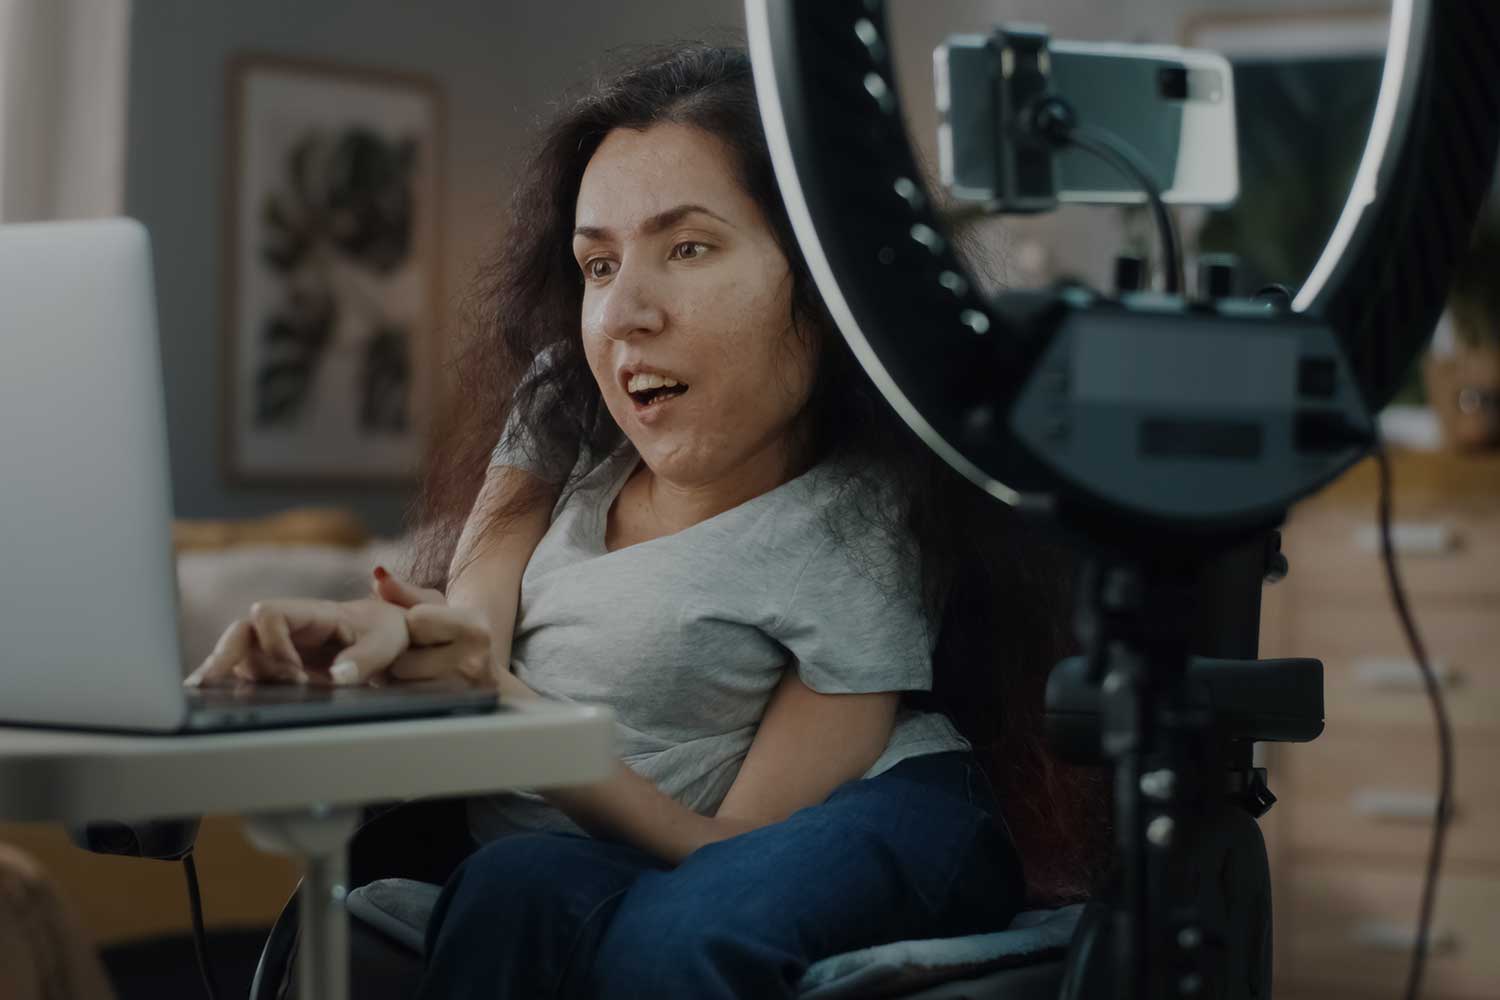 An influencer positions her wheelchair in front of her camera, laptop and studio lighting